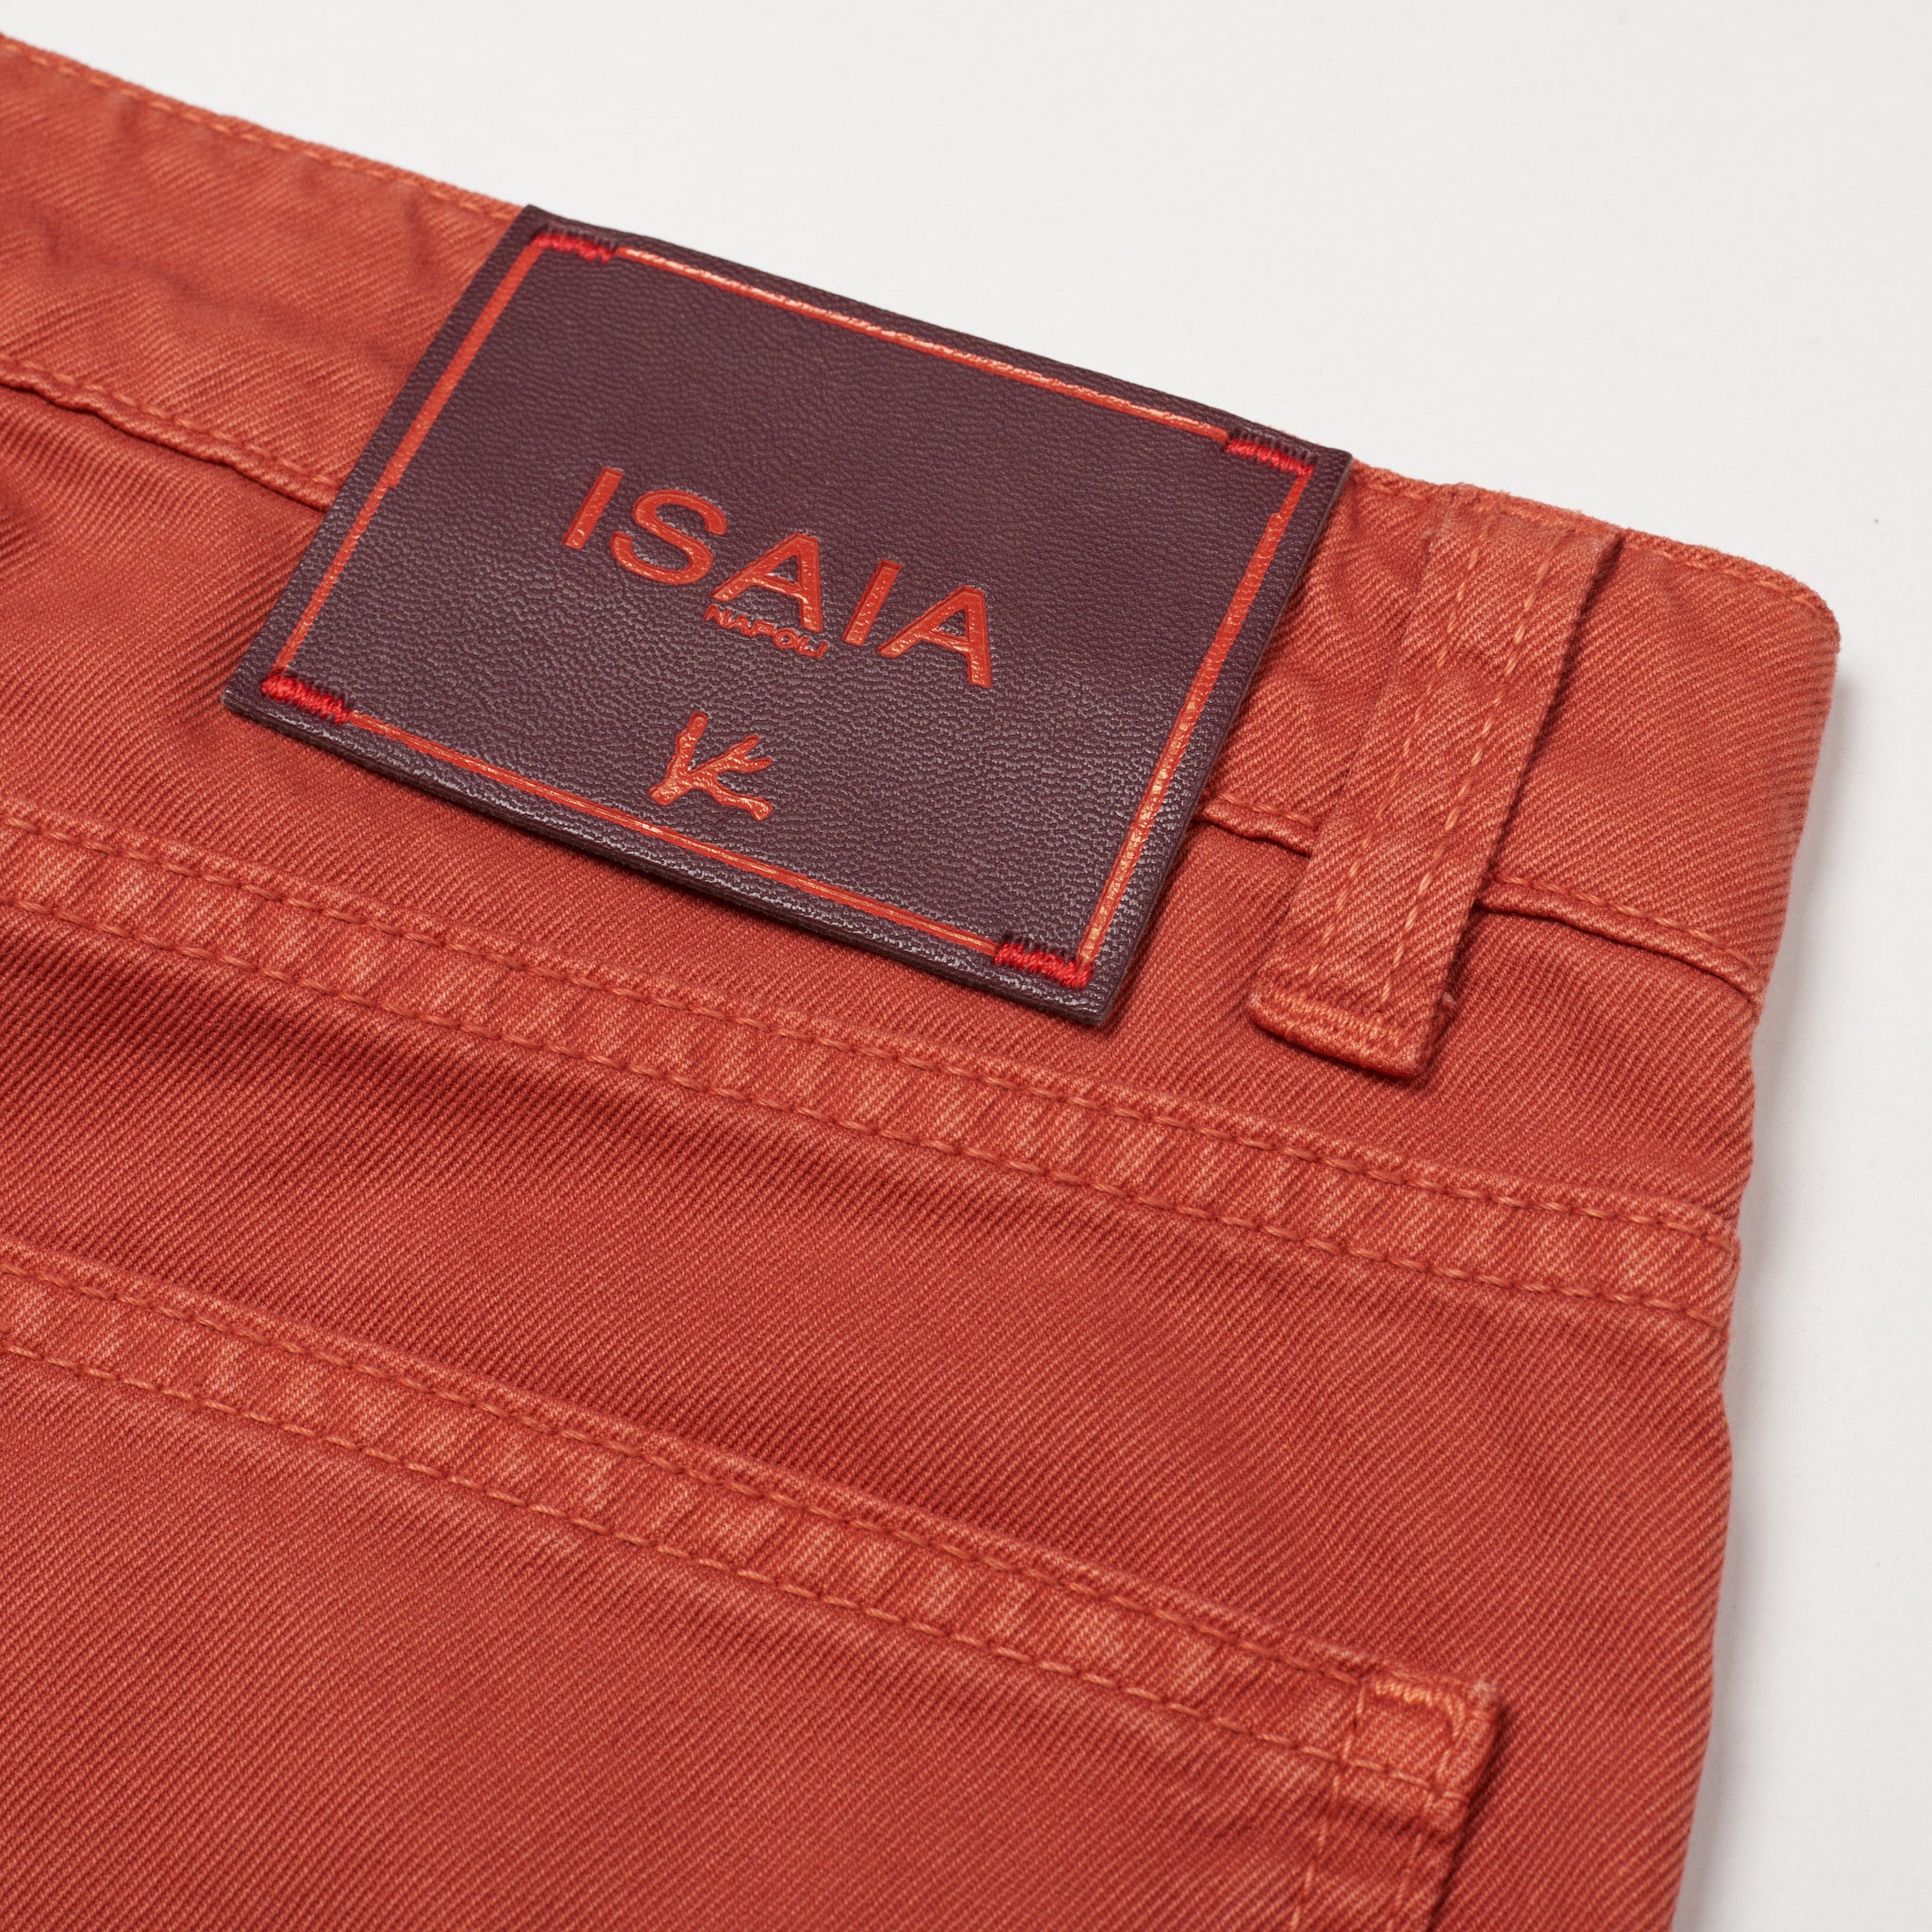 ISAIA Napoli Light Red Stretch Denim Slim Straight Fit Jeans Pants 48 NEW US 32 ISAIA